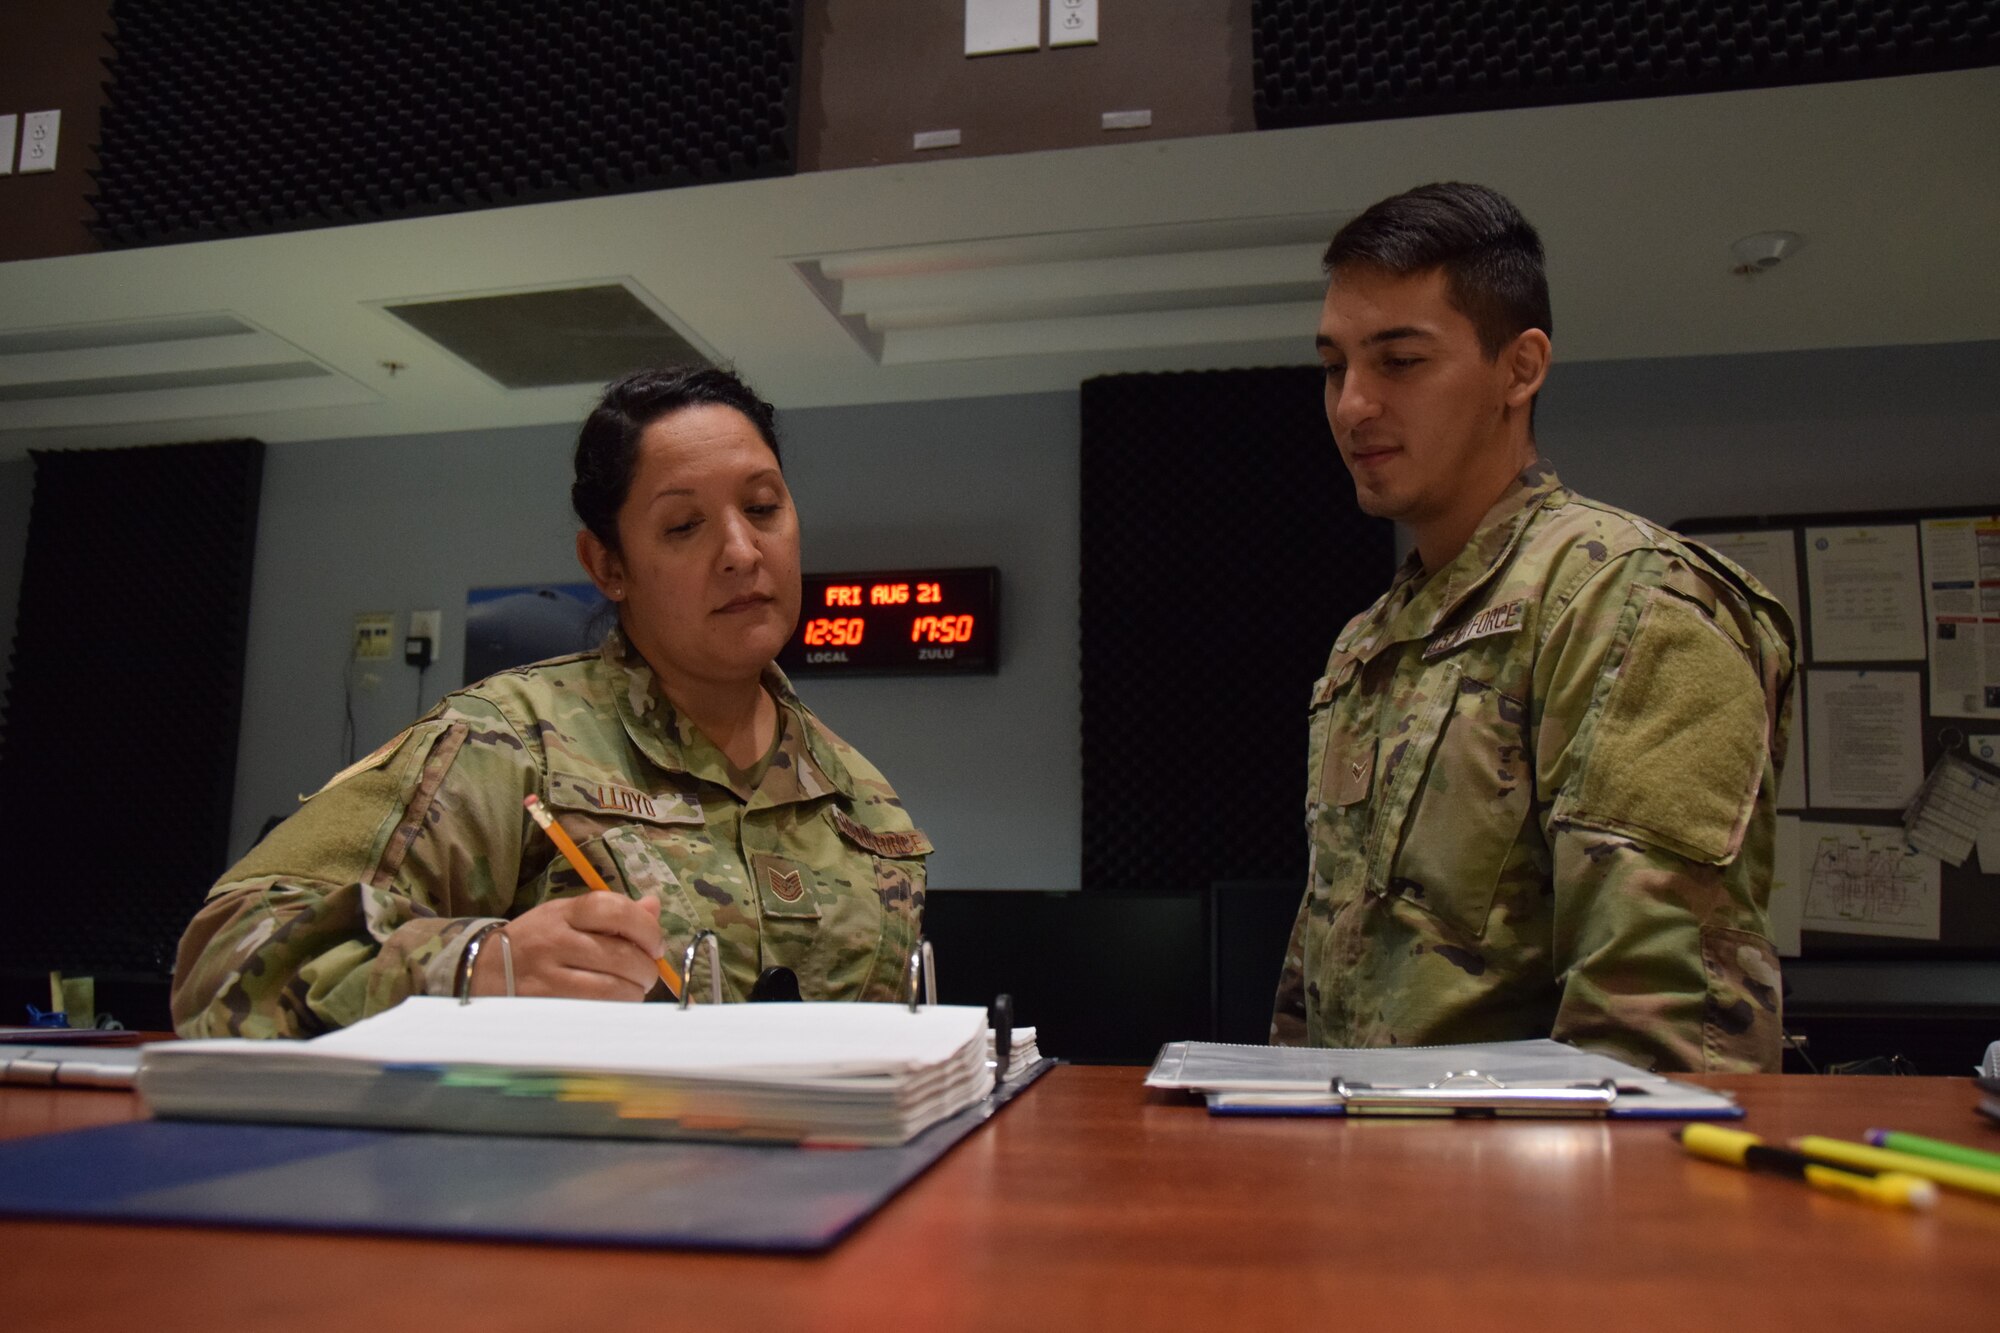 Tech. Sgt. Angela Lloyd and Airman 1st Class Jesus Alaniz, 433rd Airlift Wing Command Post controllers at Joint Base San Antonio-Lackland, Texas, review flight documentation for the C-5M Super Galaxy aircraft that evacuated Travis Air Force Base, California Aug. 21, 2020.